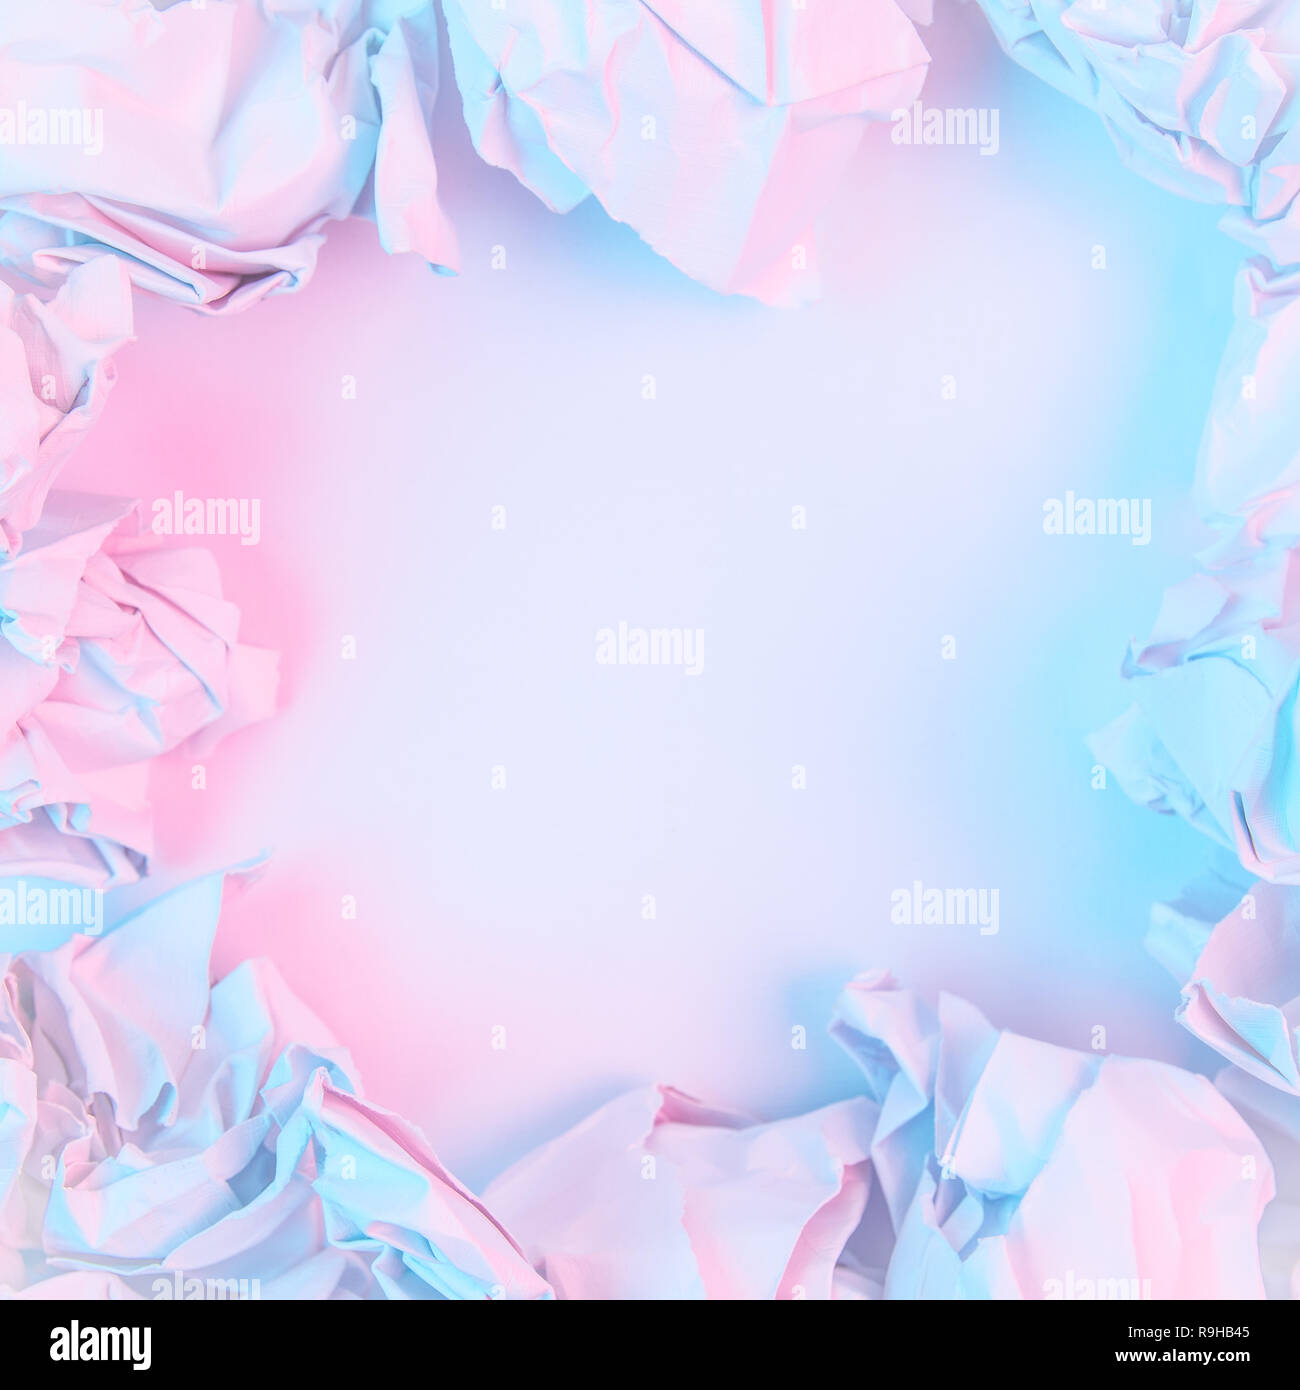 Pastel pink and blue abstract square border background image made from  crumpled paper Stock Photo - Alamy